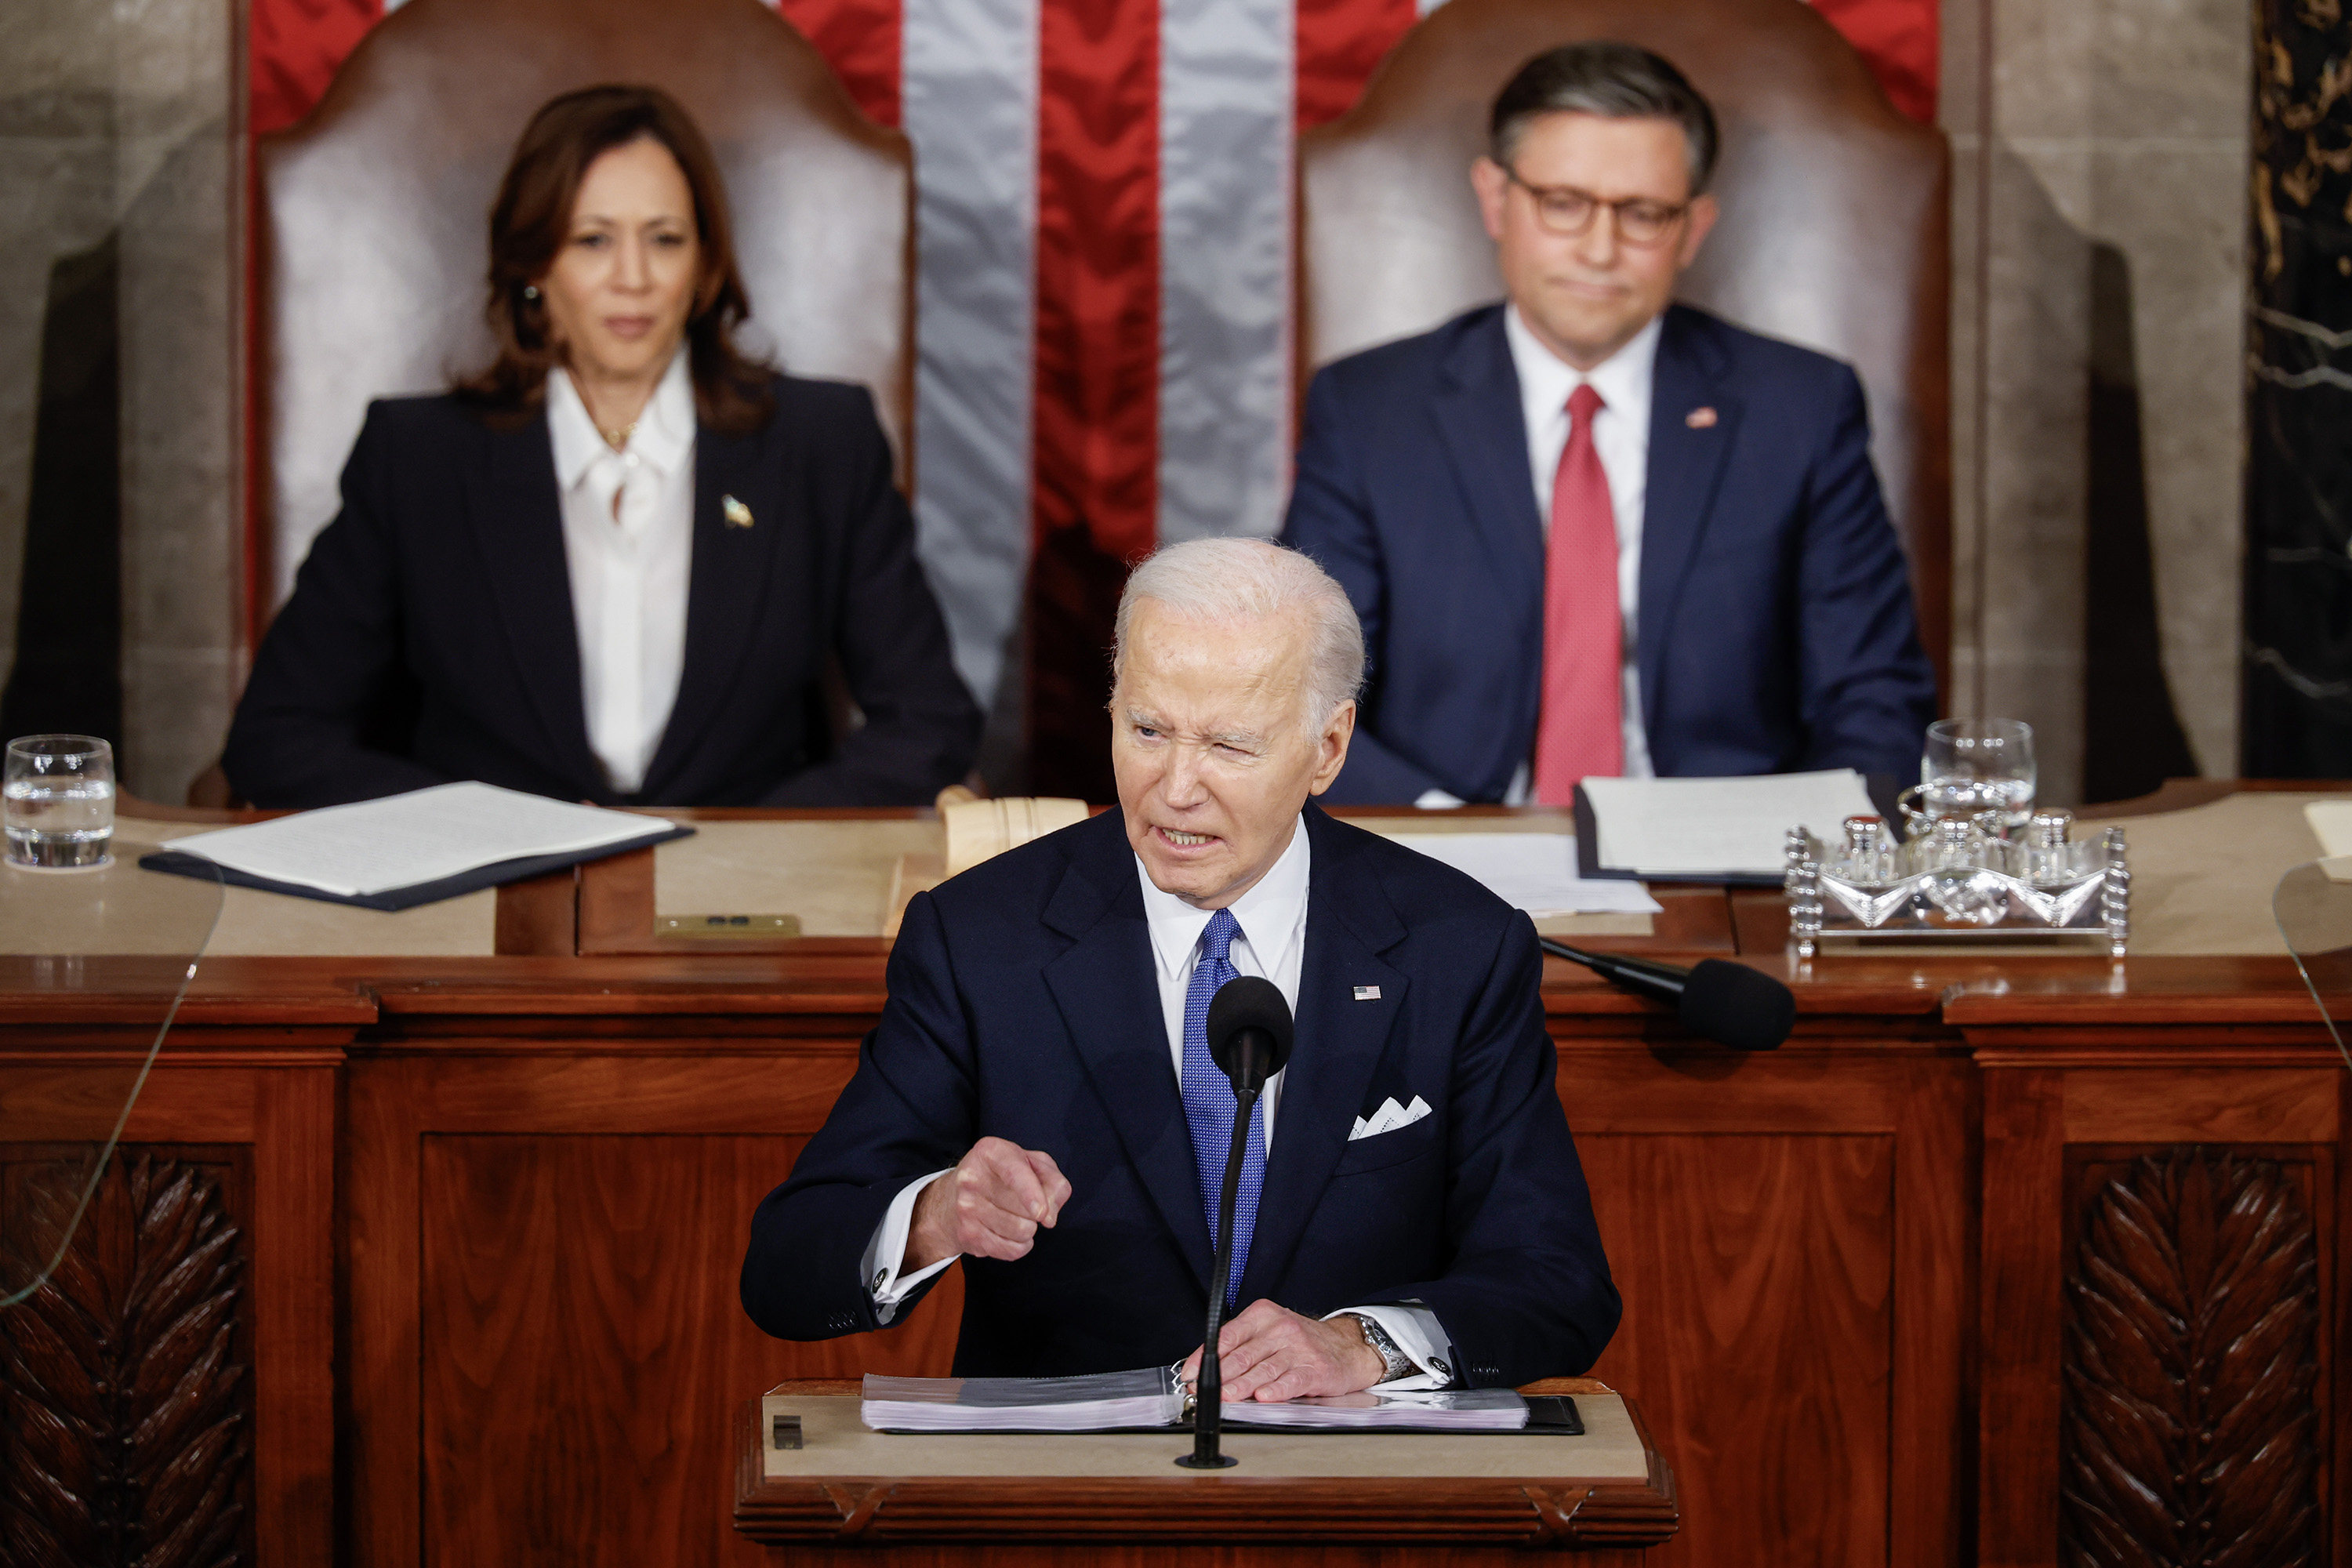 US President Joe Biden delivers the State of the Union address during a joint meeting of Congress in the House chamber at the US Capitol on Thursday. Photo: Getty Images/TNS